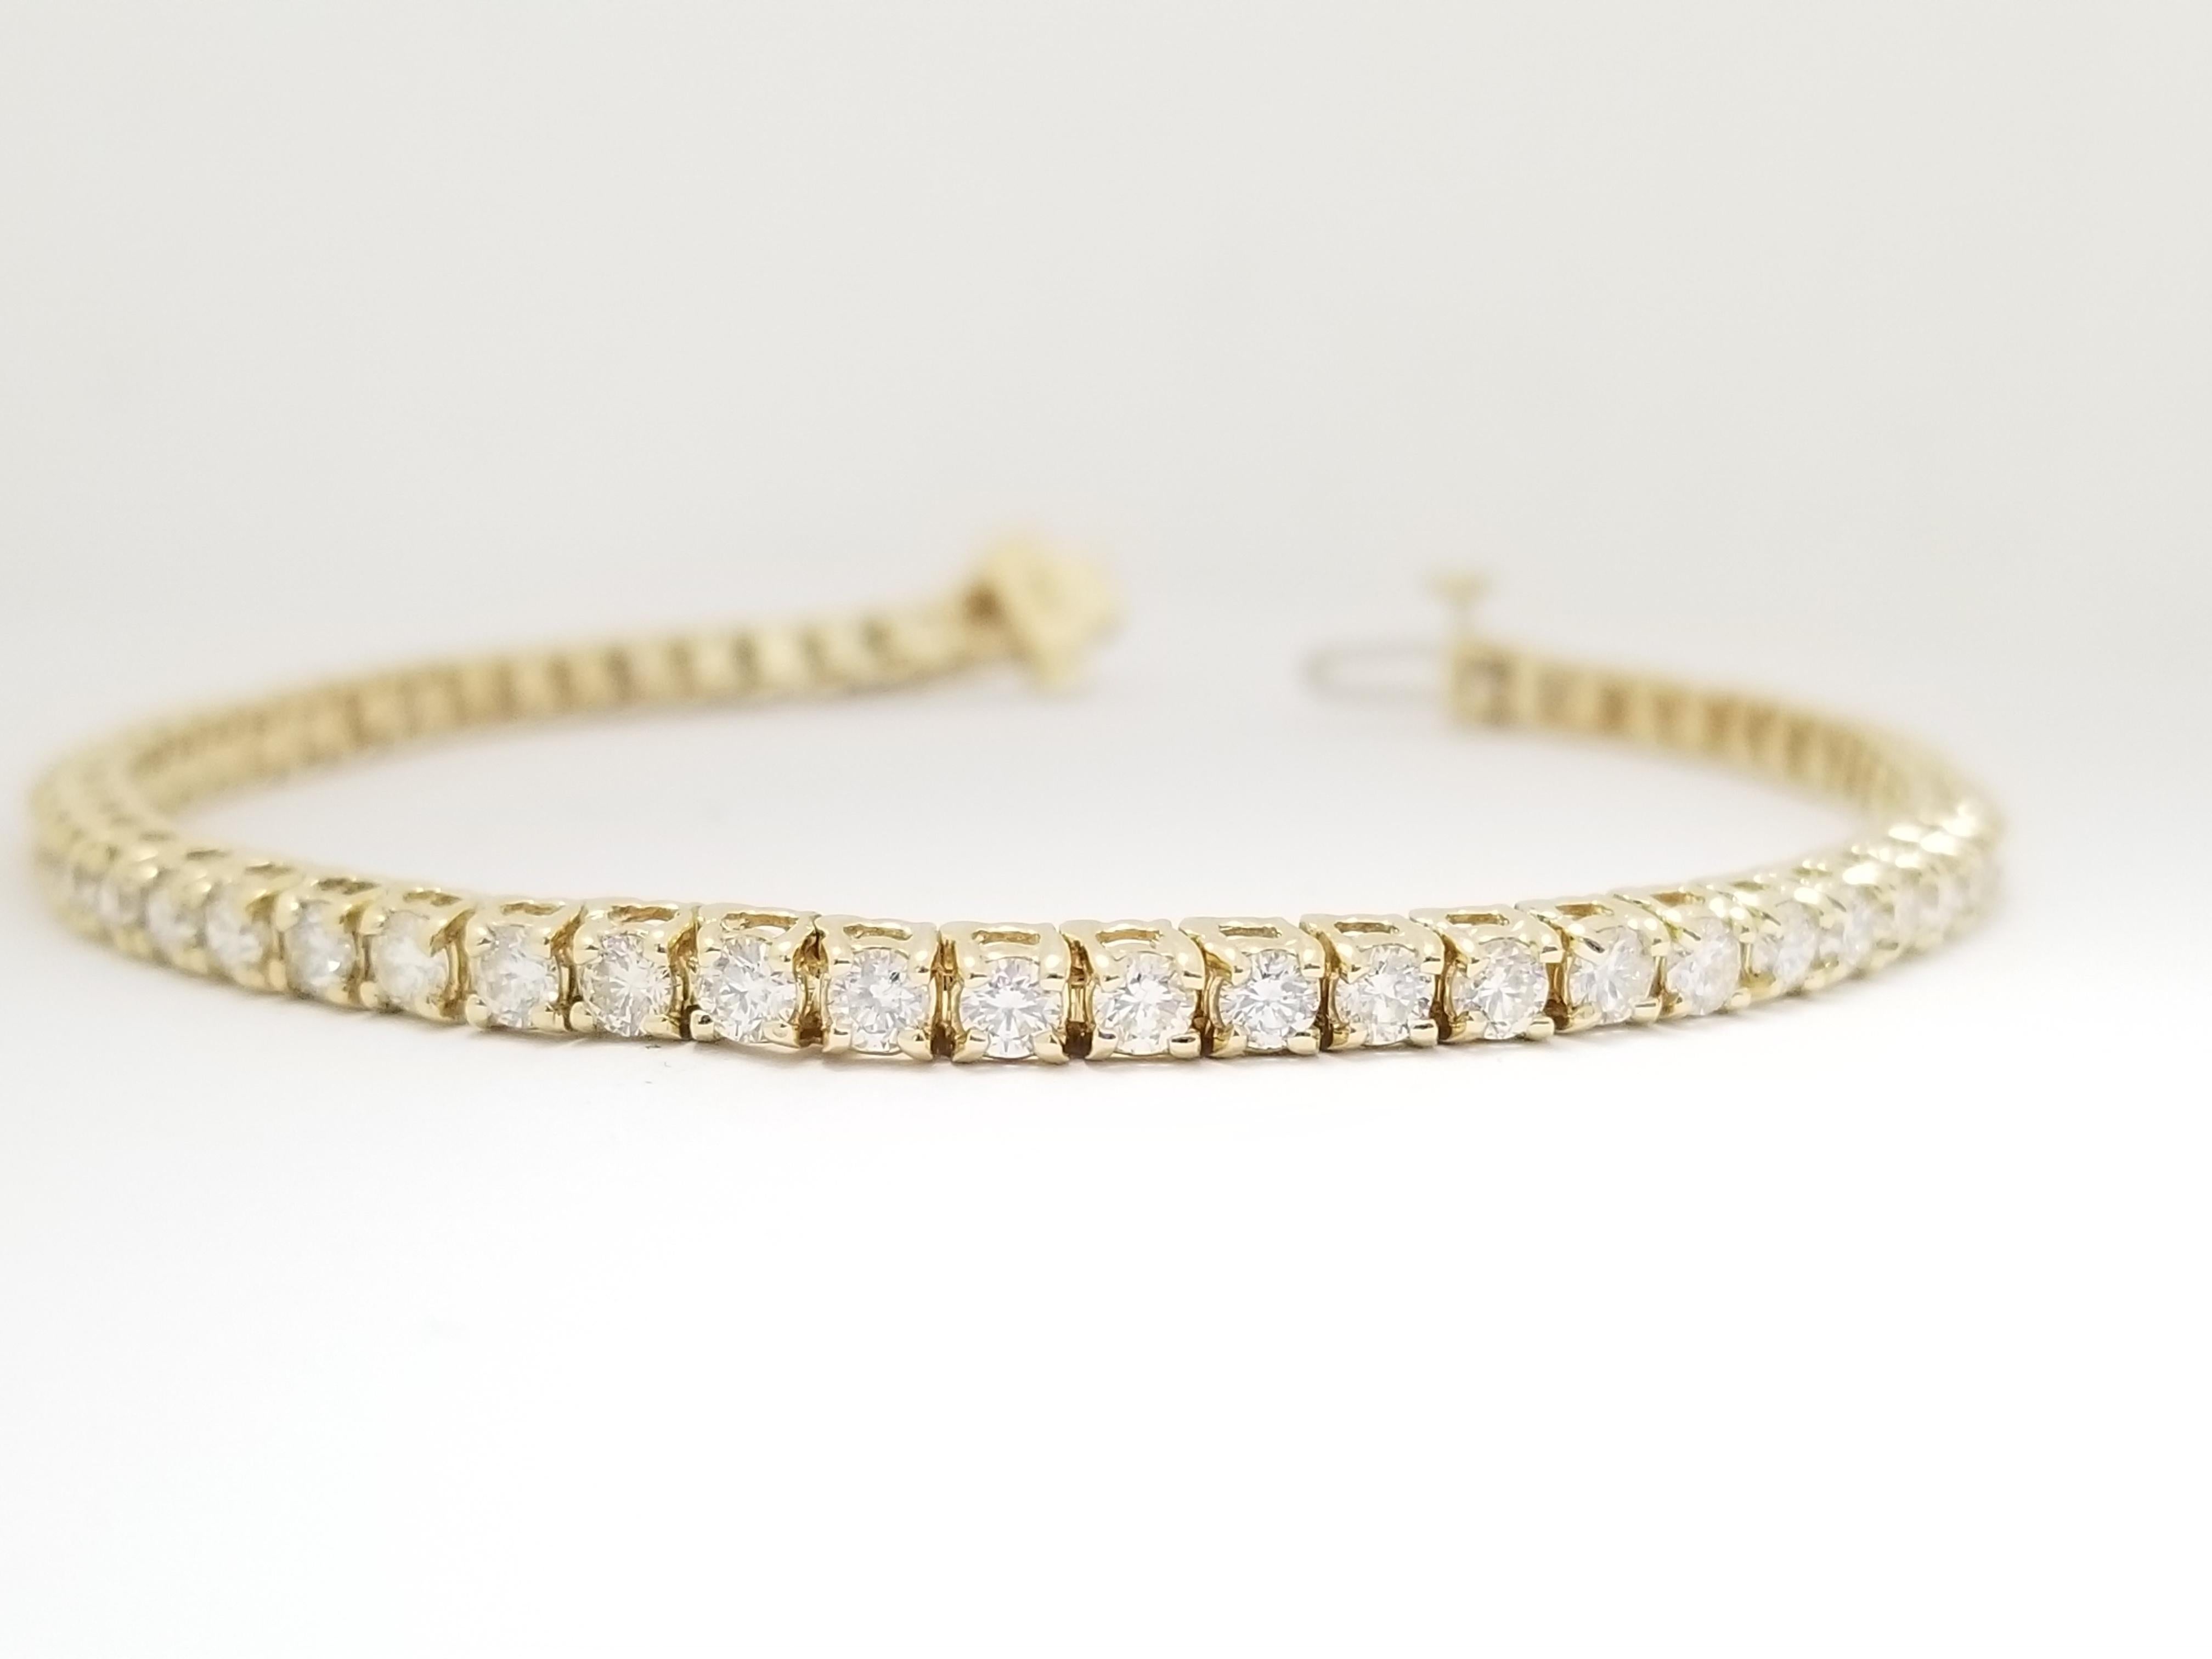 A quality tennis bracelet, natural round-brilliant cut diamonds. set on 14k solid yellow gold. each stone is set in a classic four-prong style for maximum light brilliance. 7 inch length. Average I Color, SI Clarity. 